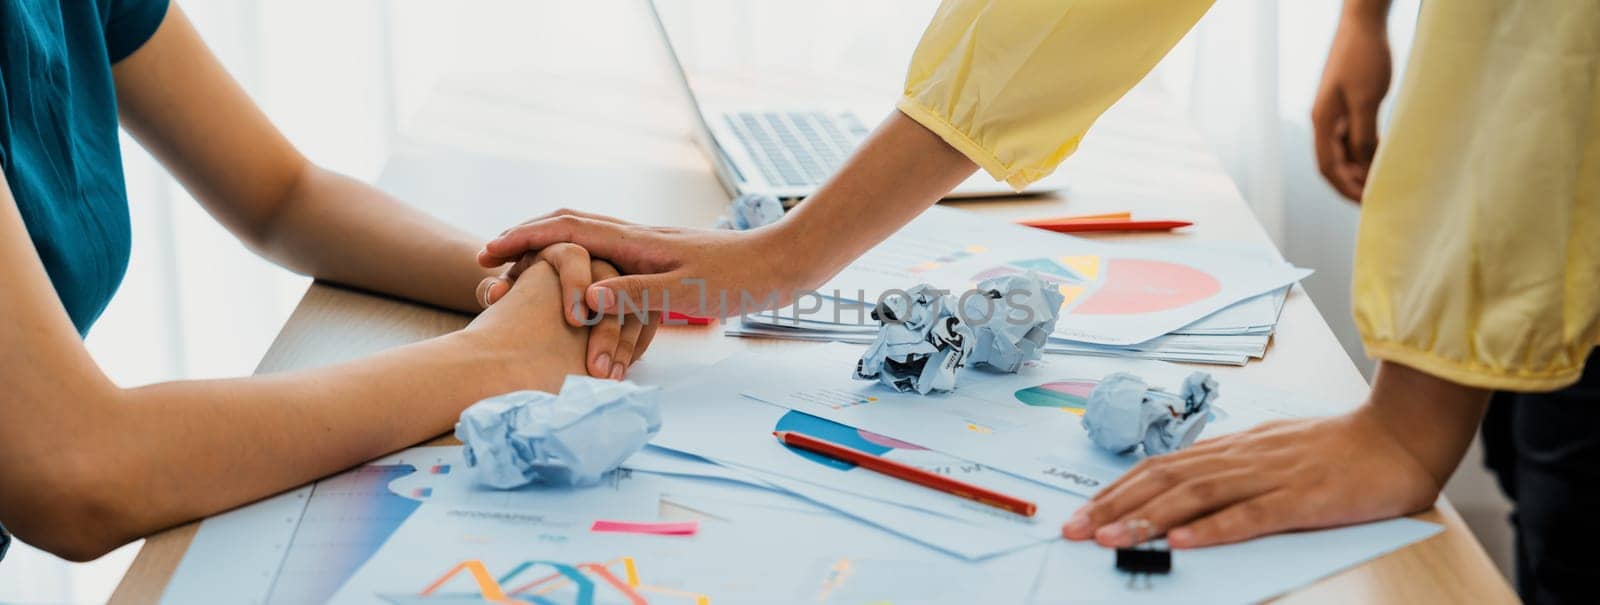 Panorama banner startup employee holding hand to stressful colleague. Synergic by biancoblue